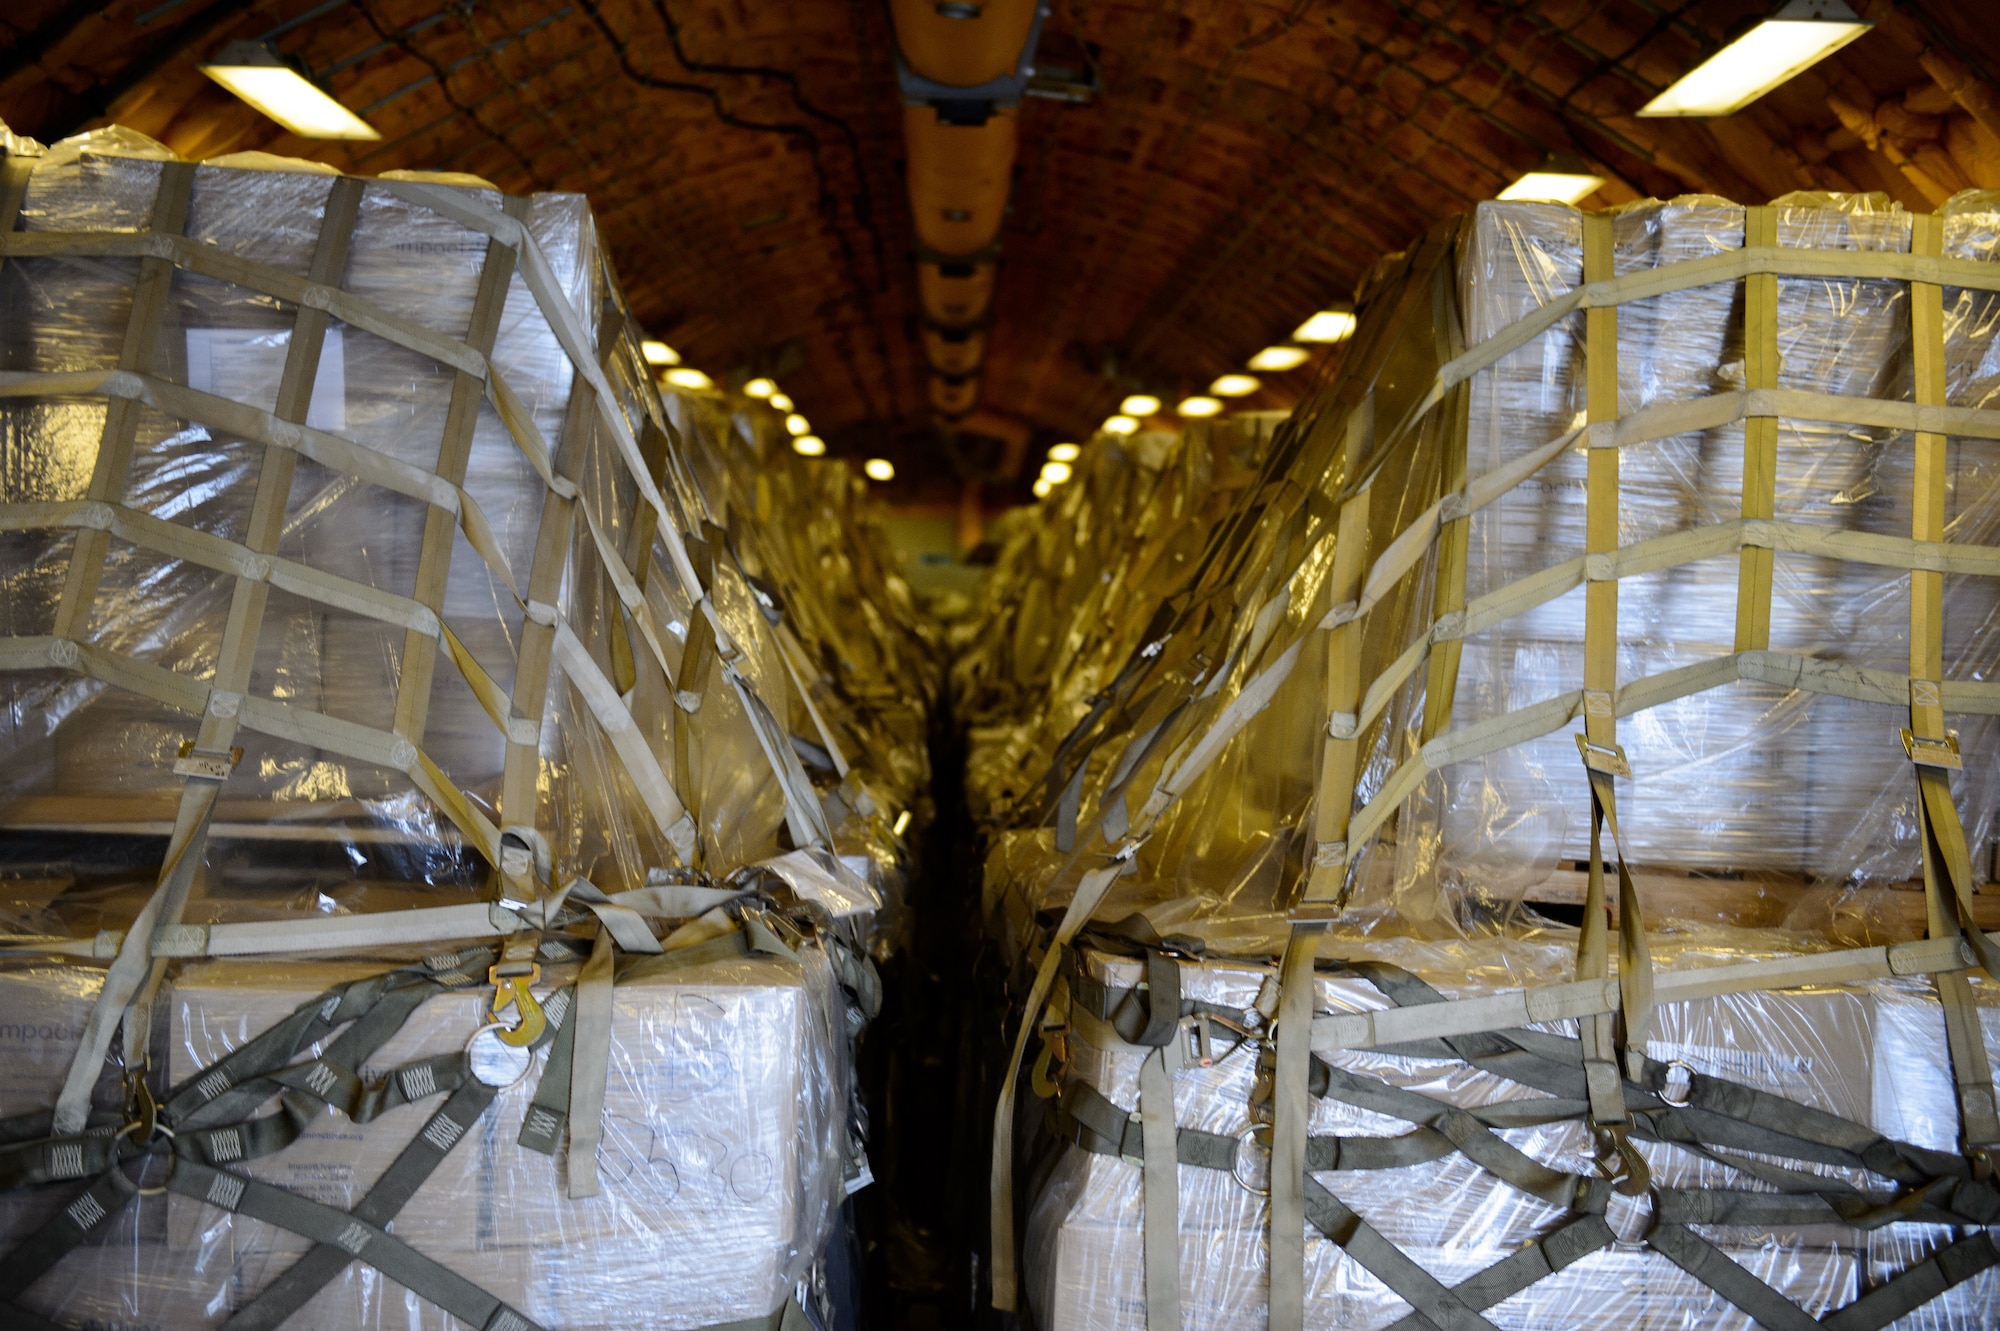 Cargo pallets wait as Airmen from the 521st Air Mobility Operations Wing offload them from a KC-10 Extender March 25, 2016, at Ramstein Air Base, Germany. Cargo regularly flows through Ramstein’s ramps however the load brought by the KC-10 was to provide meals for children in need. (U.S. Air Force photo/Staff Sgt. Armando A. Schwier-Morales)